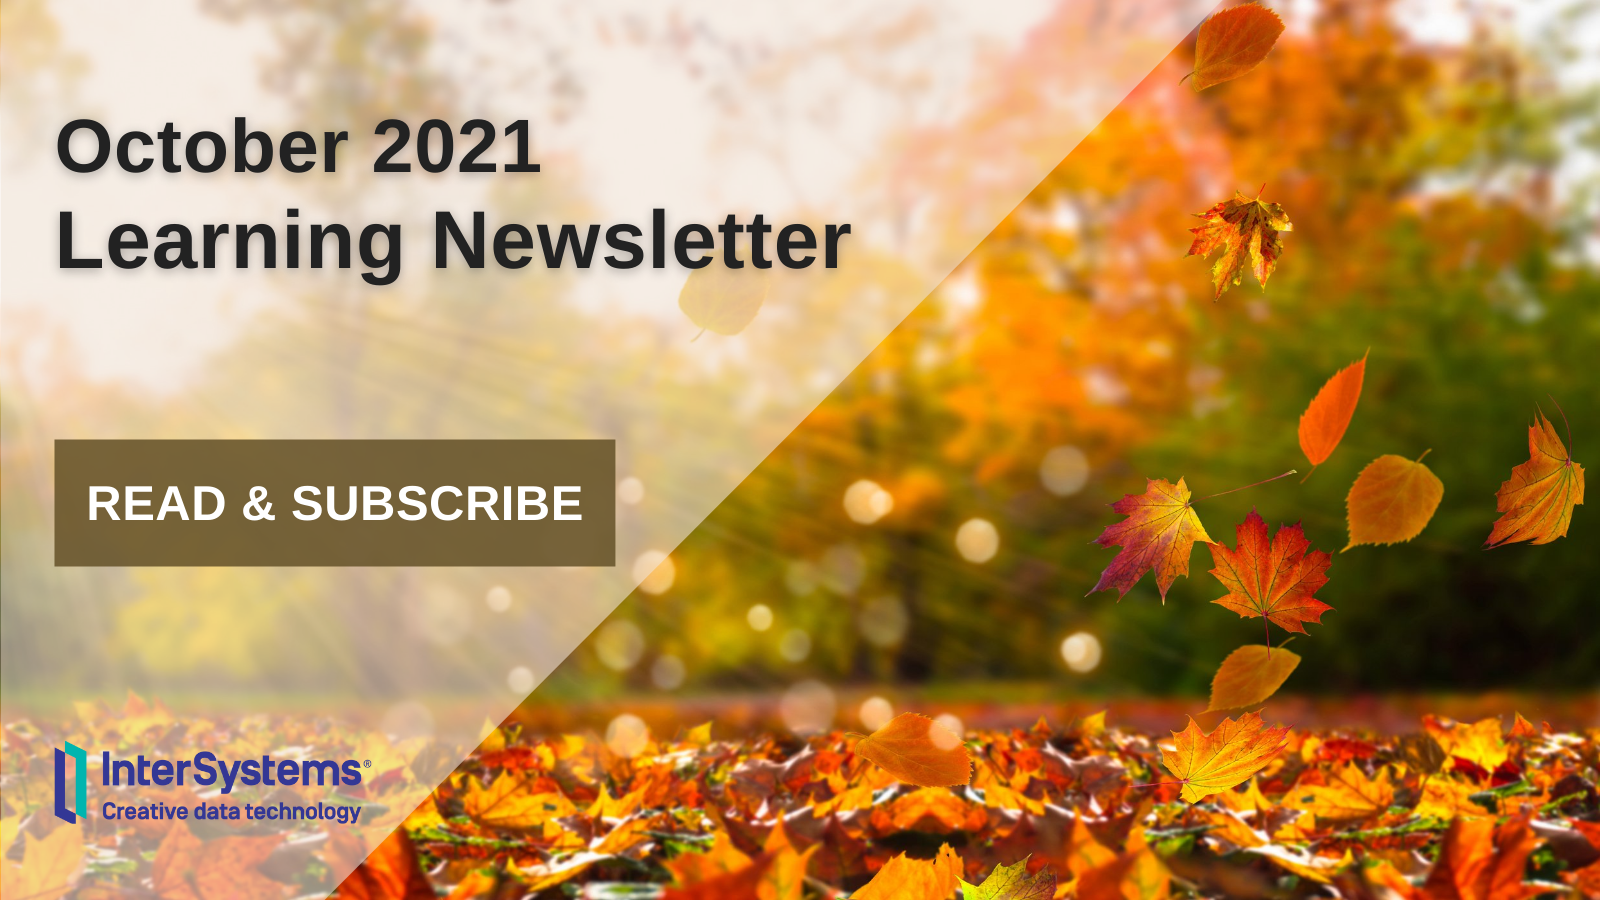 October 2021 Learning Newsletter: Read and Subscribe